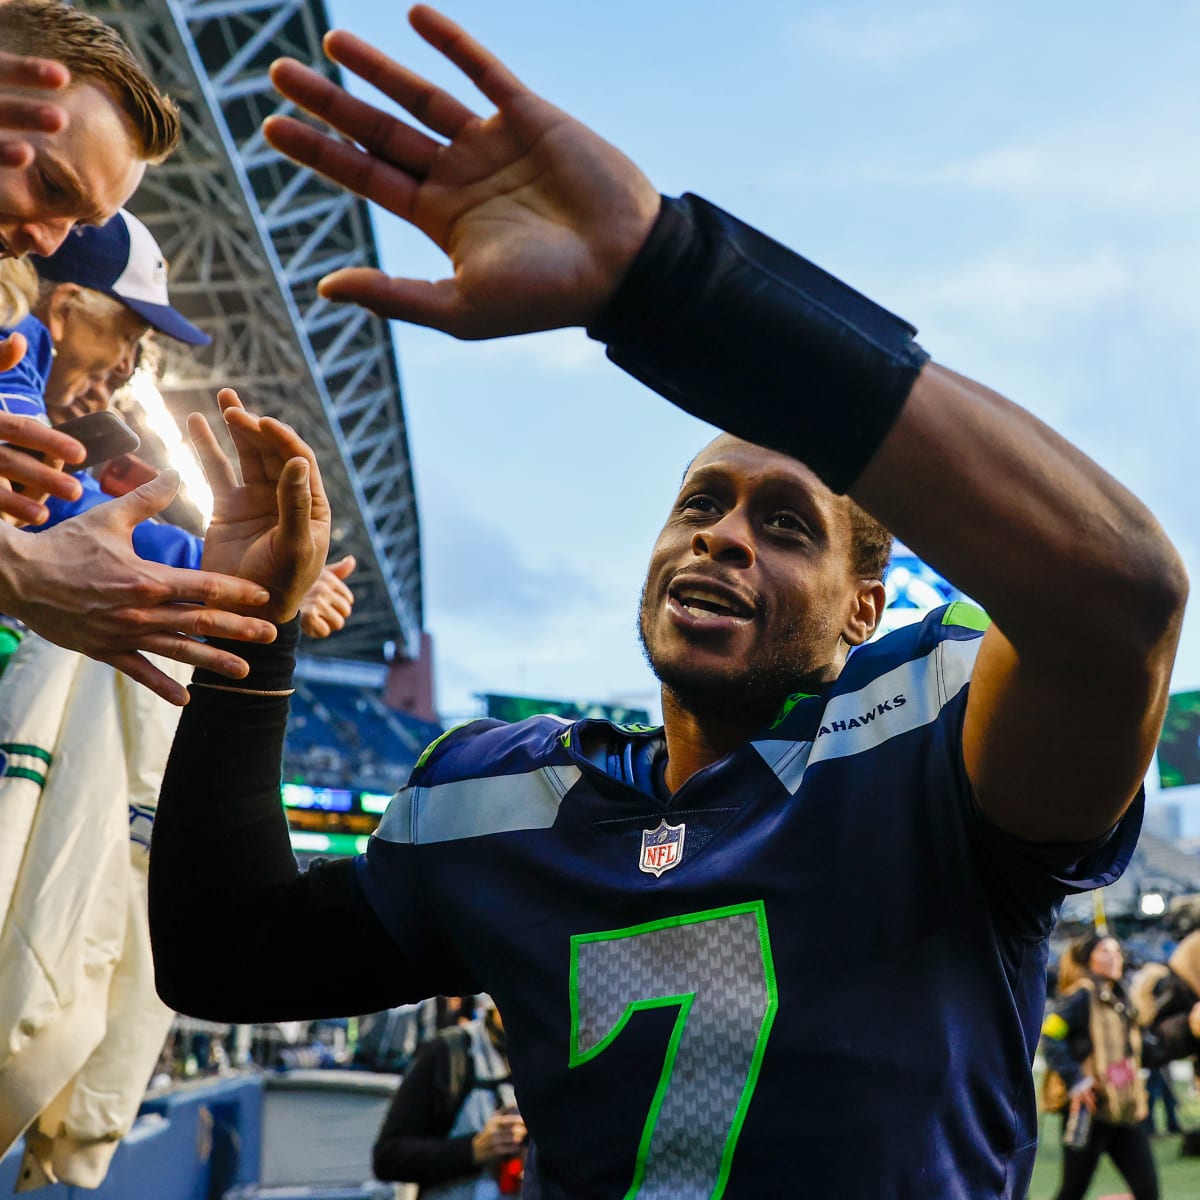 Seahawks QB Geno Smith's free agency will be fascinating case study -  Seattle Sports